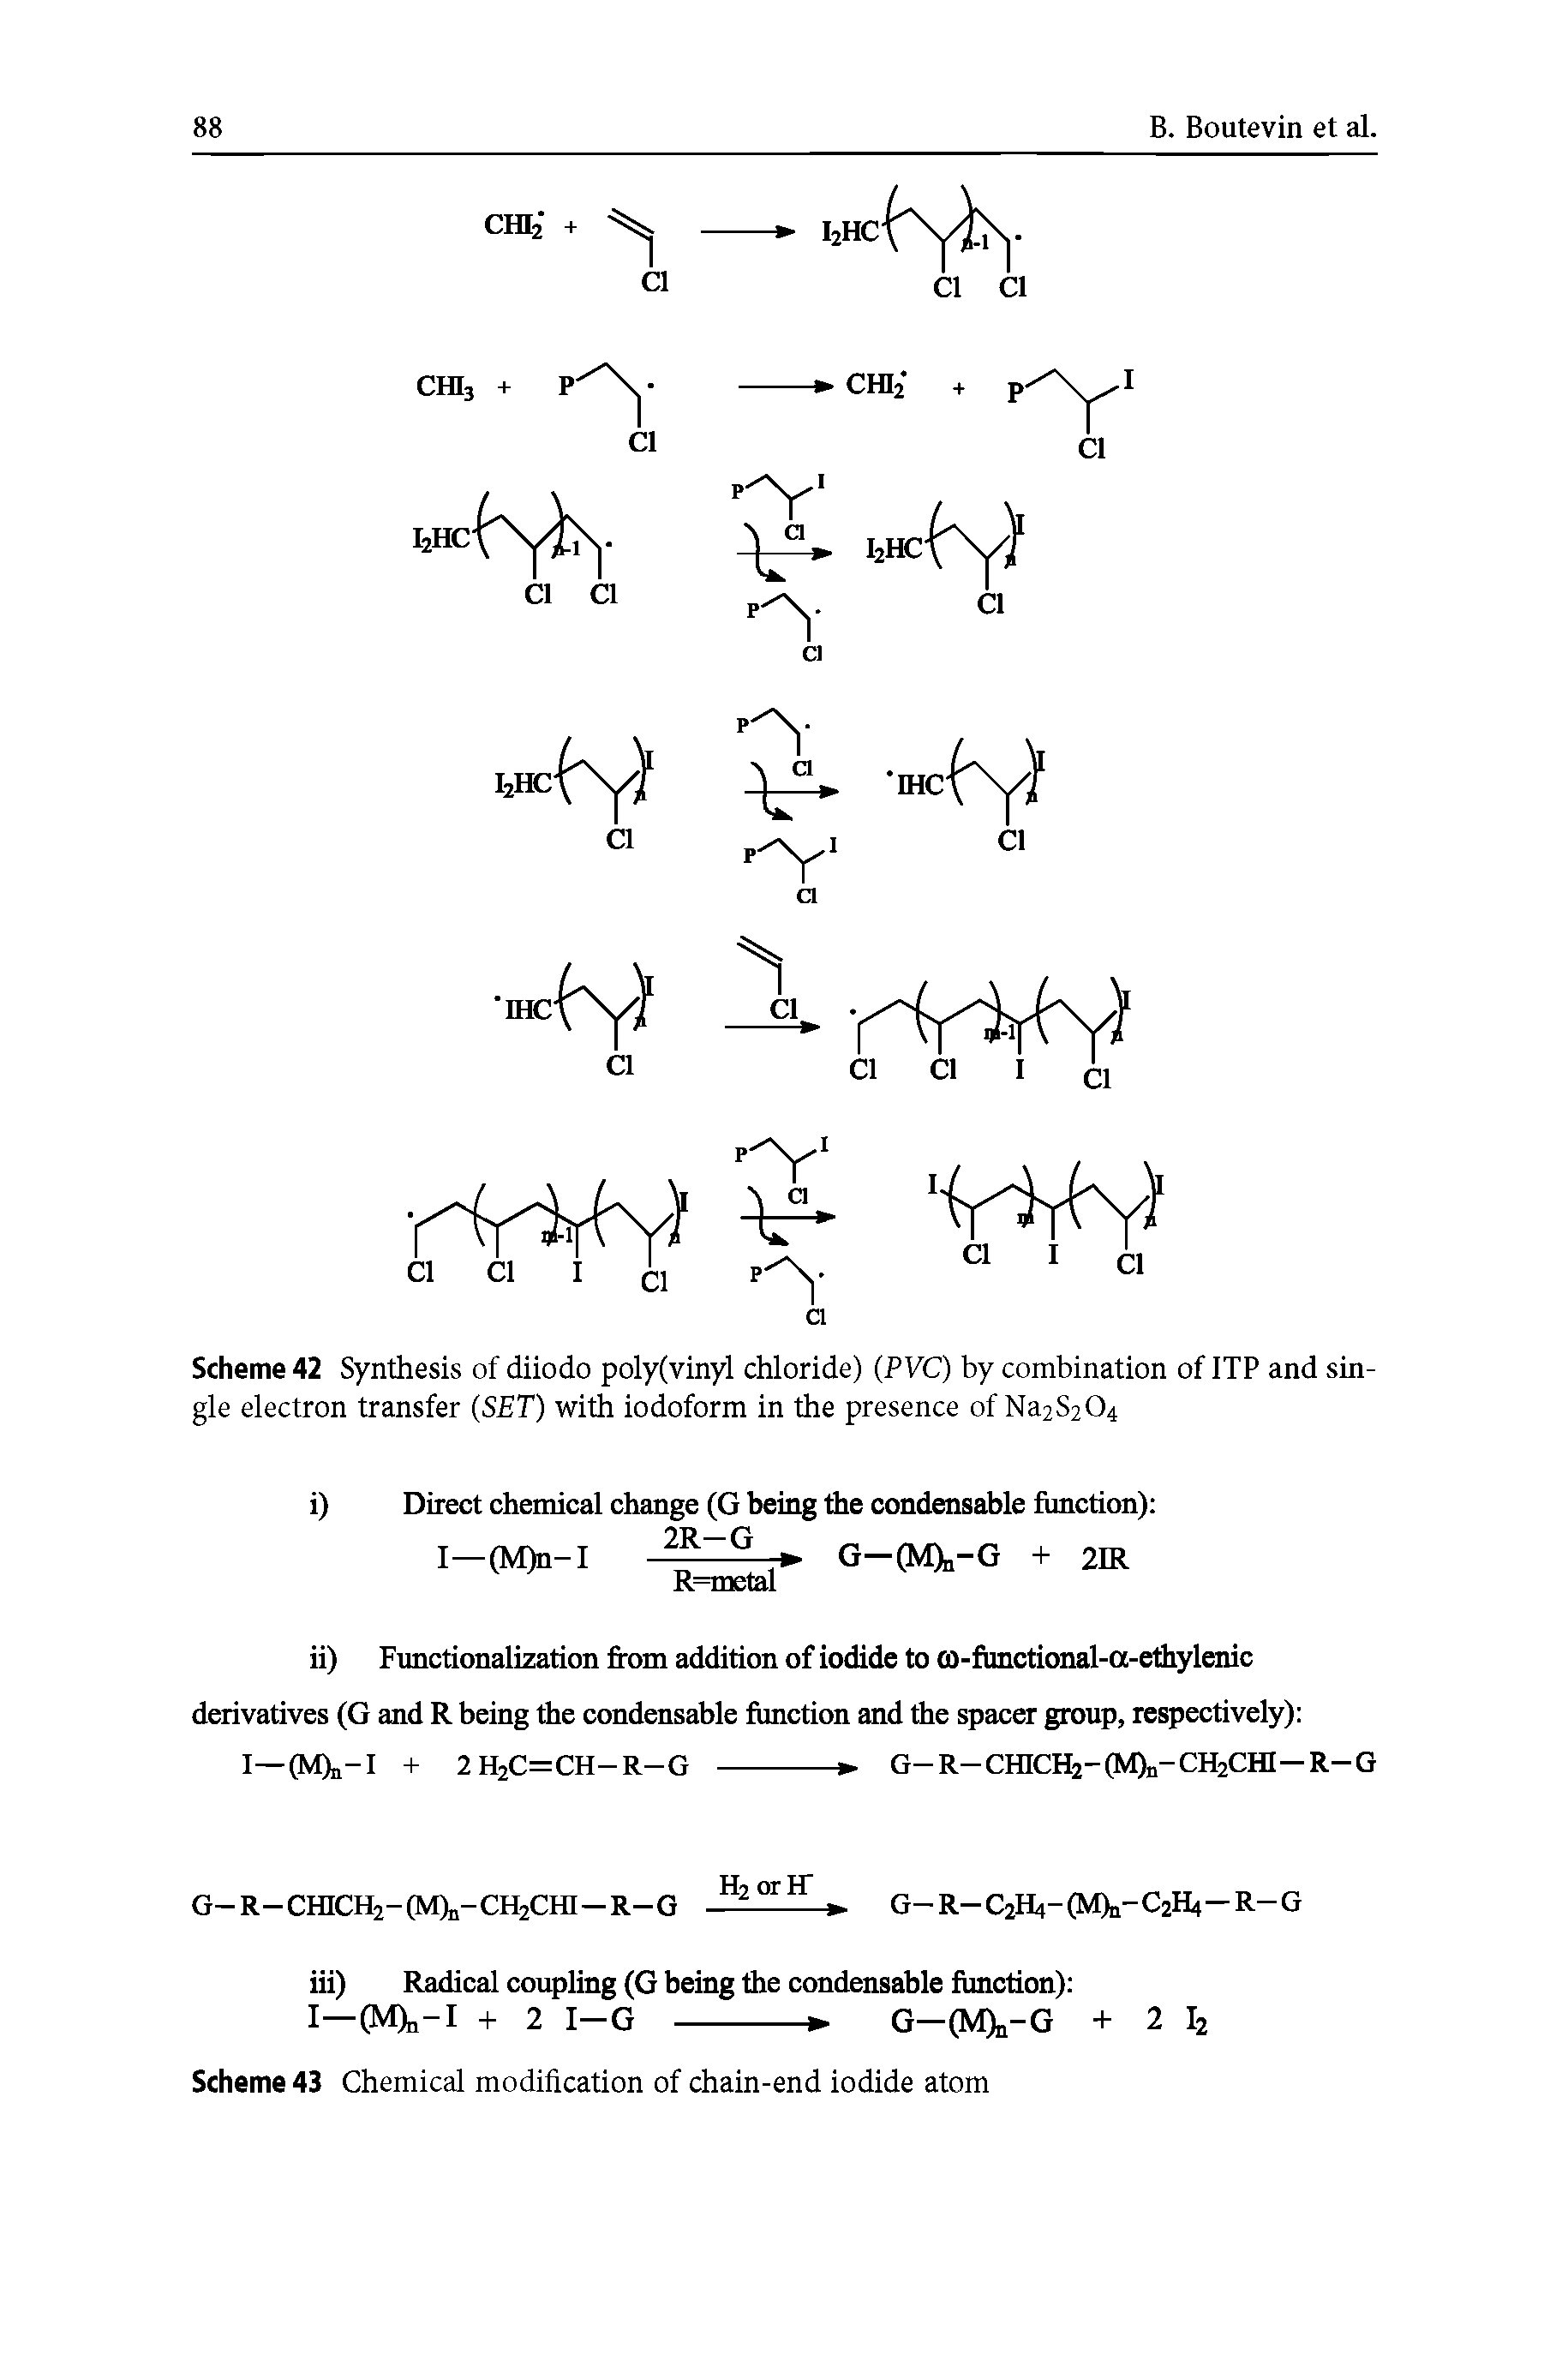 Scheme 42 Synthesis of diiodo poly(vinyl chloride) (PVC) by combination of ITP and single electron transfer (SET) with iodoform in the presence of Na2S204...